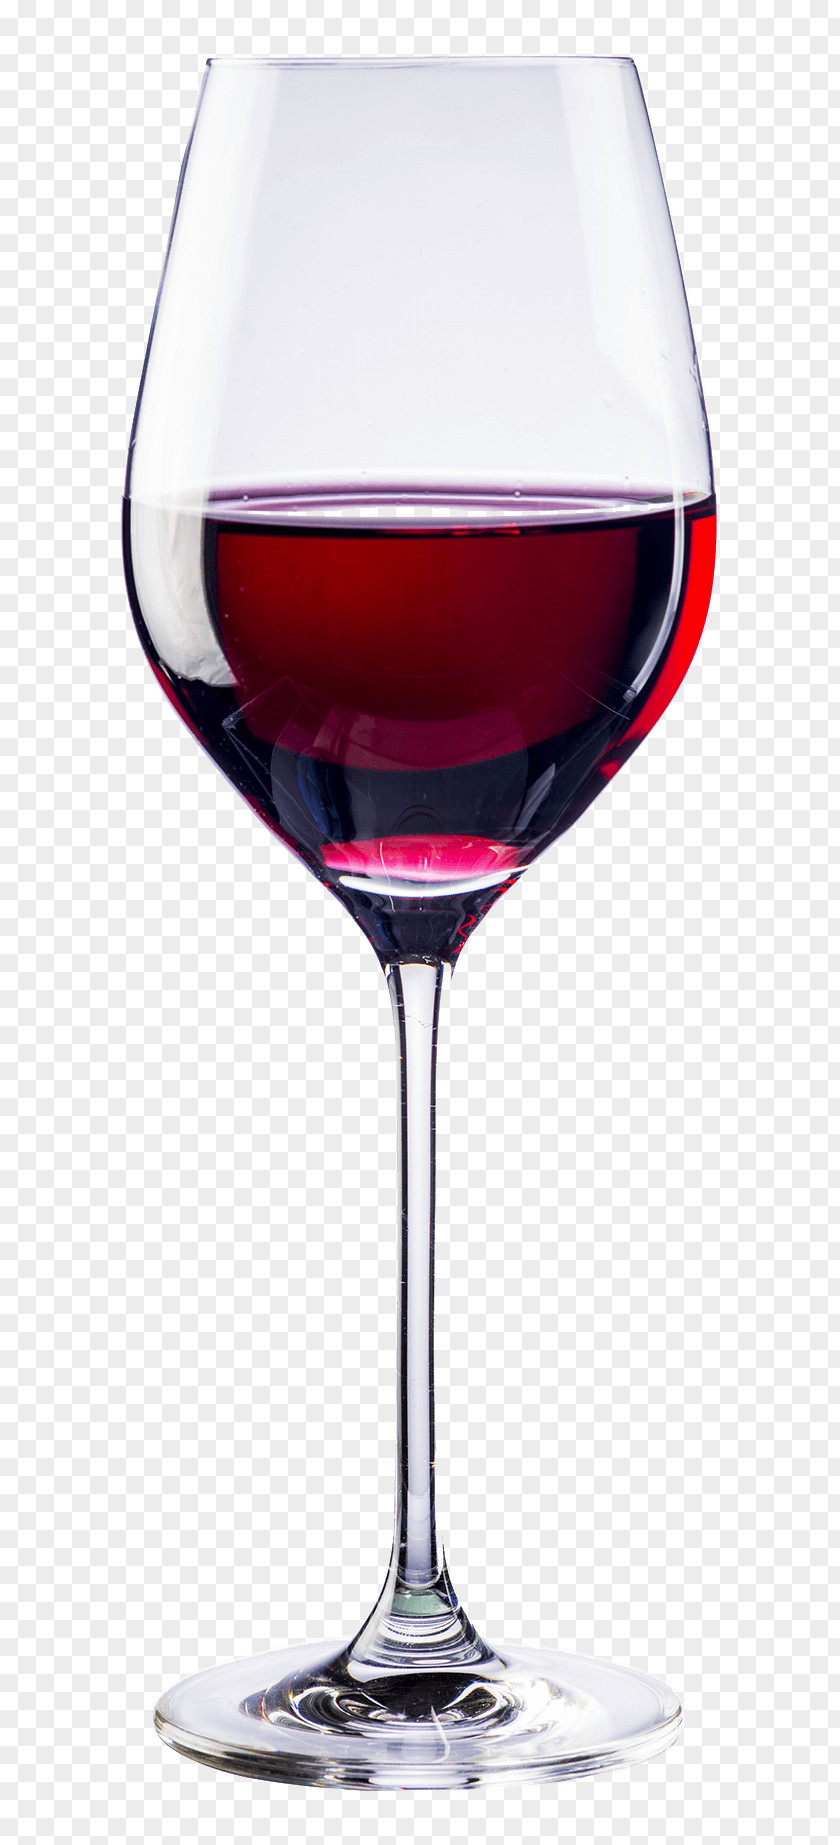 Wine Red Glass Tasting Bottle PNG